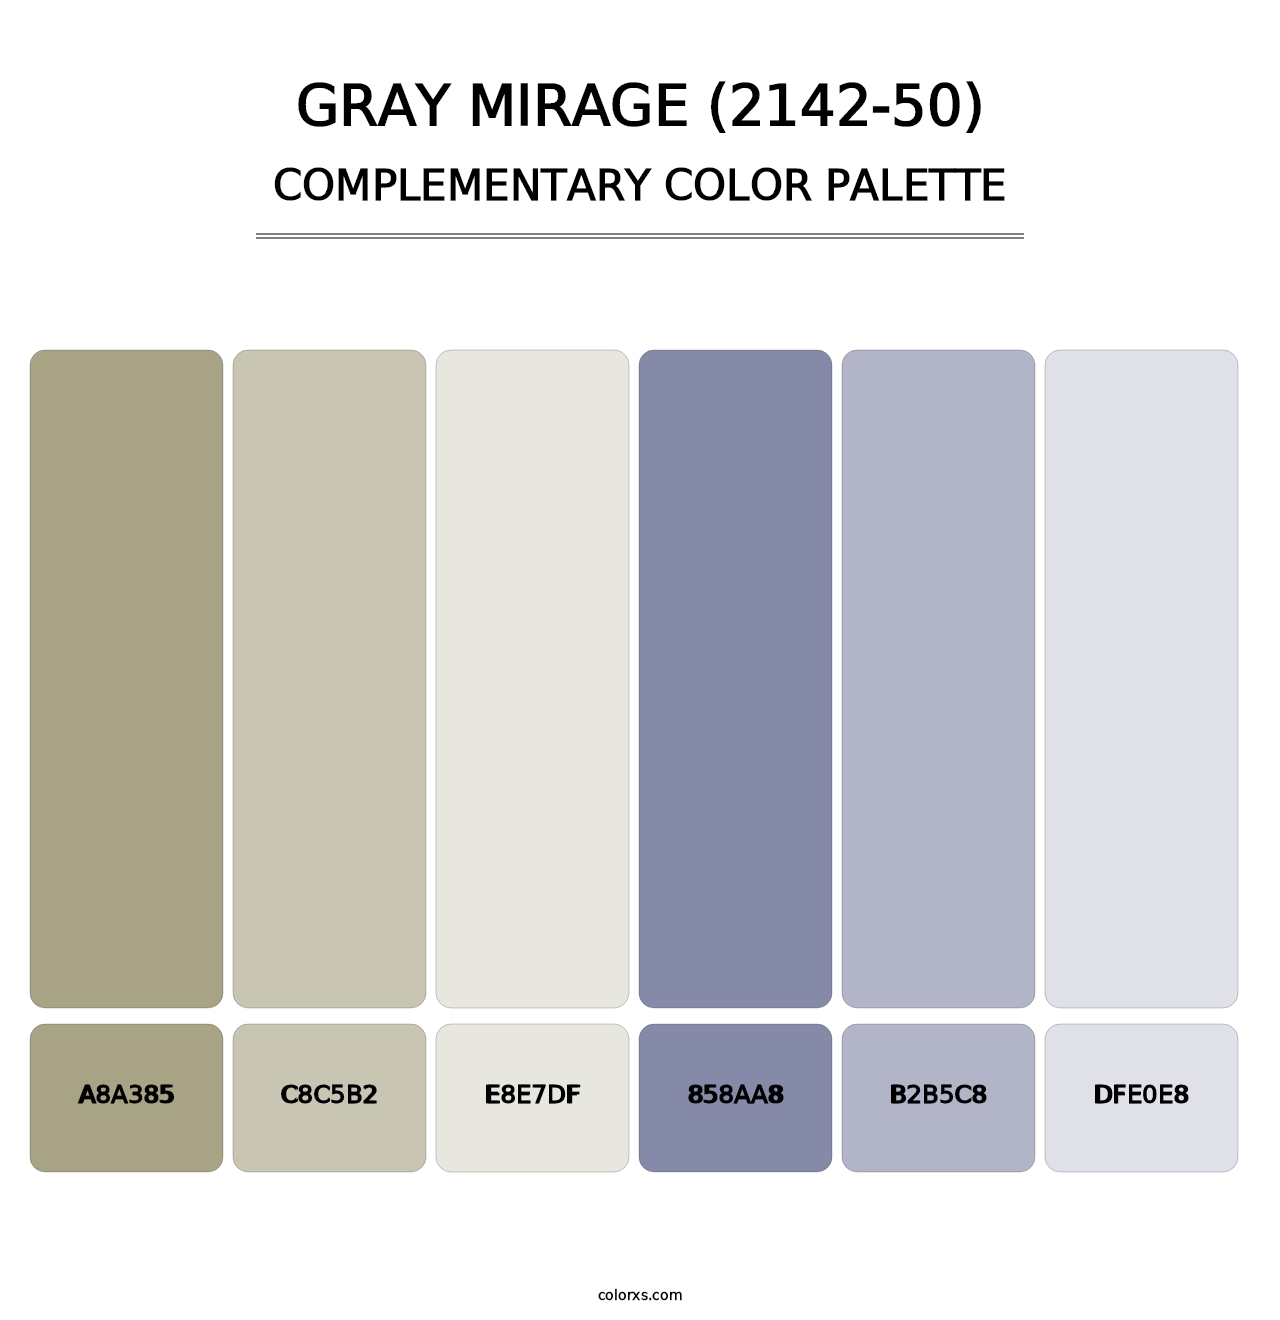 Gray Mirage (2142-50) - Complementary Color Palette